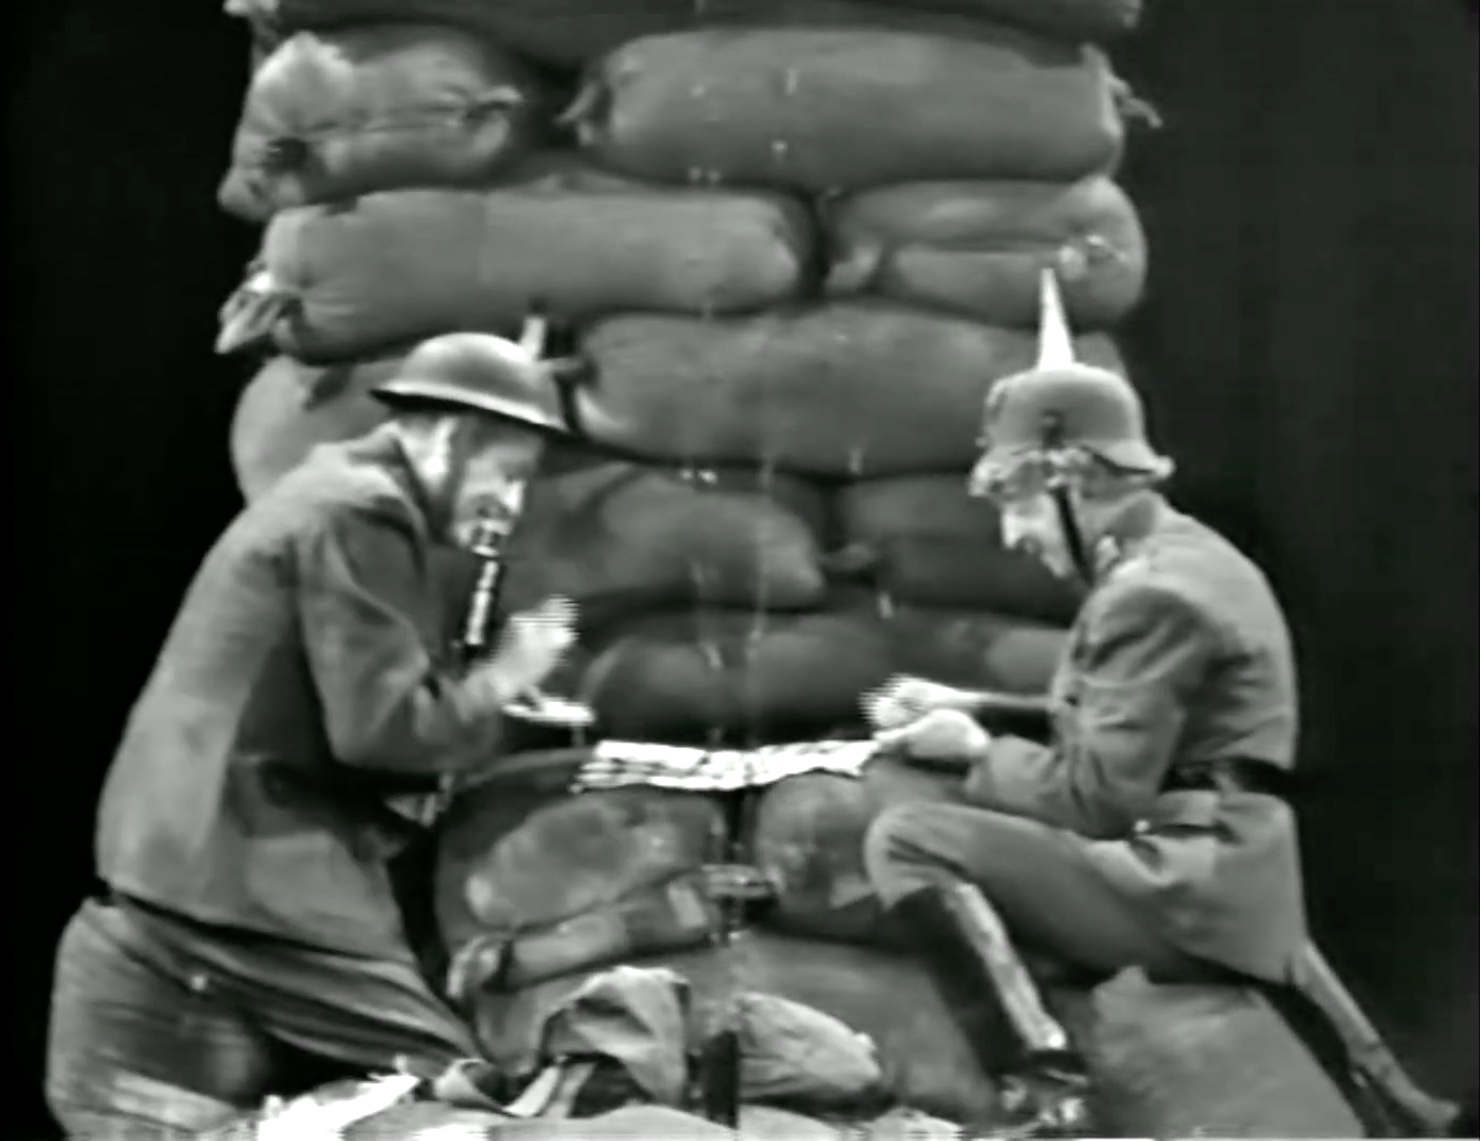 Soldiers Red Skelton and Harpo Marx, on opposite sides, play checkers